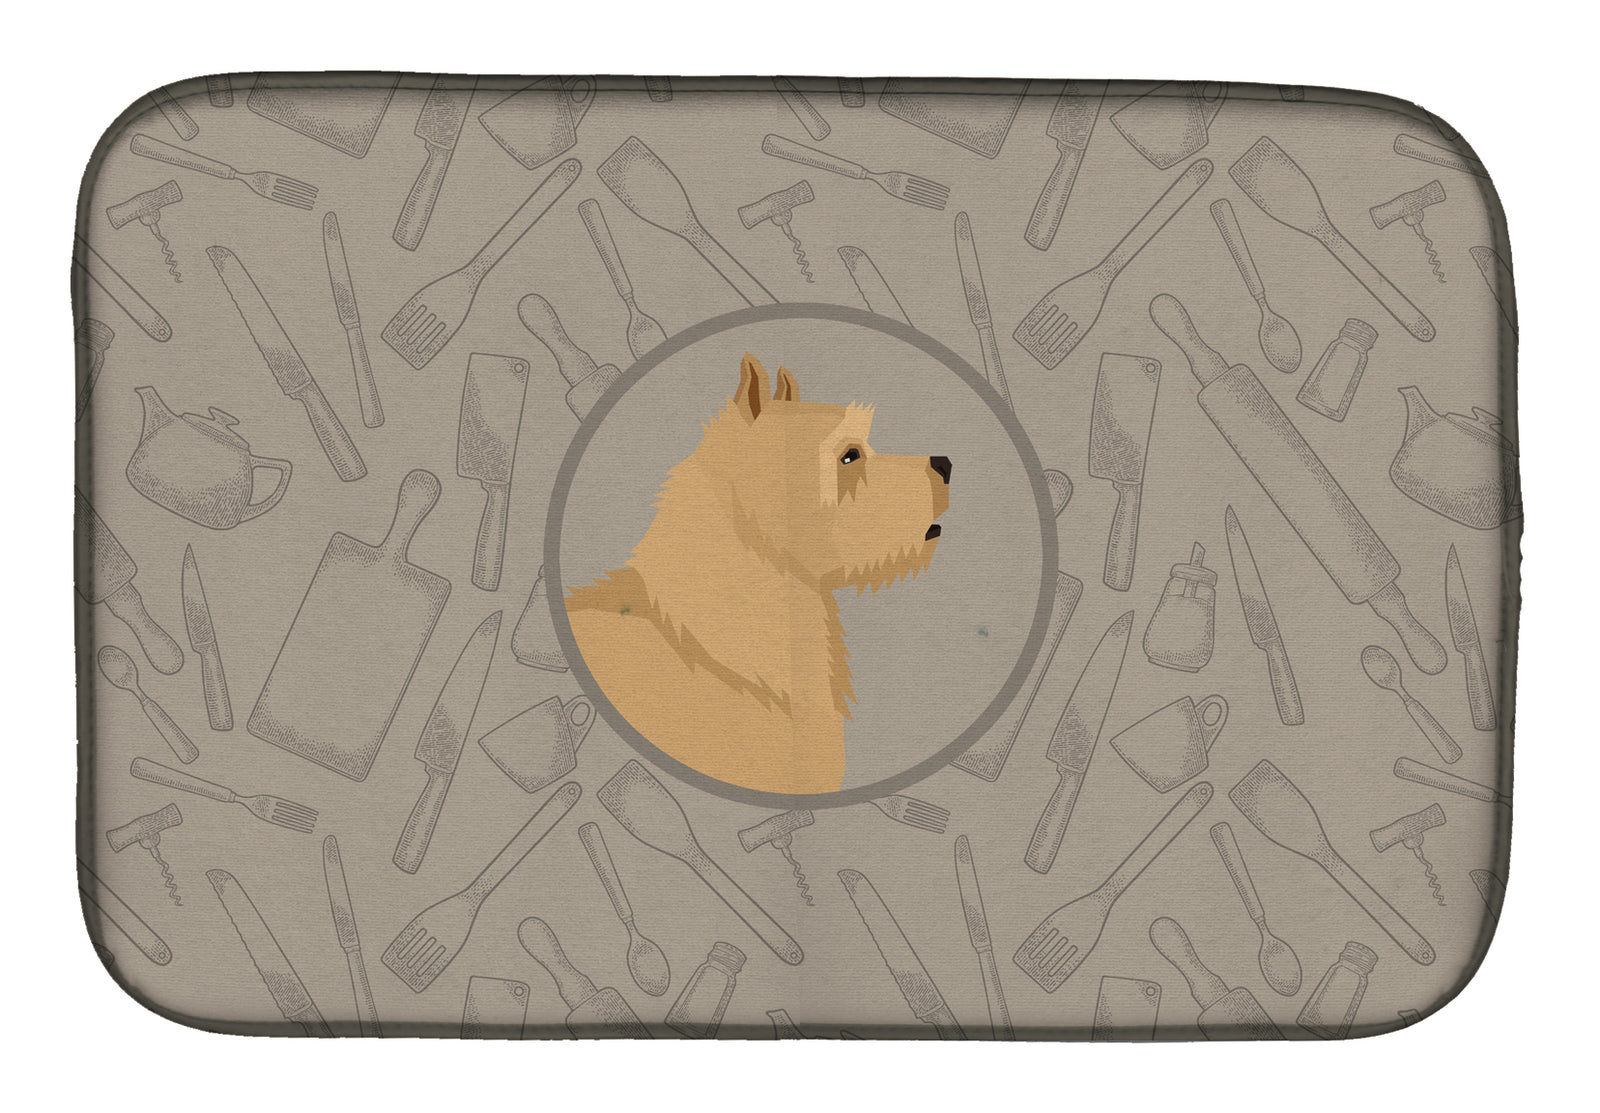 Norwich Terrier In the Kitchen Dish Drying Mat CK2198DDM